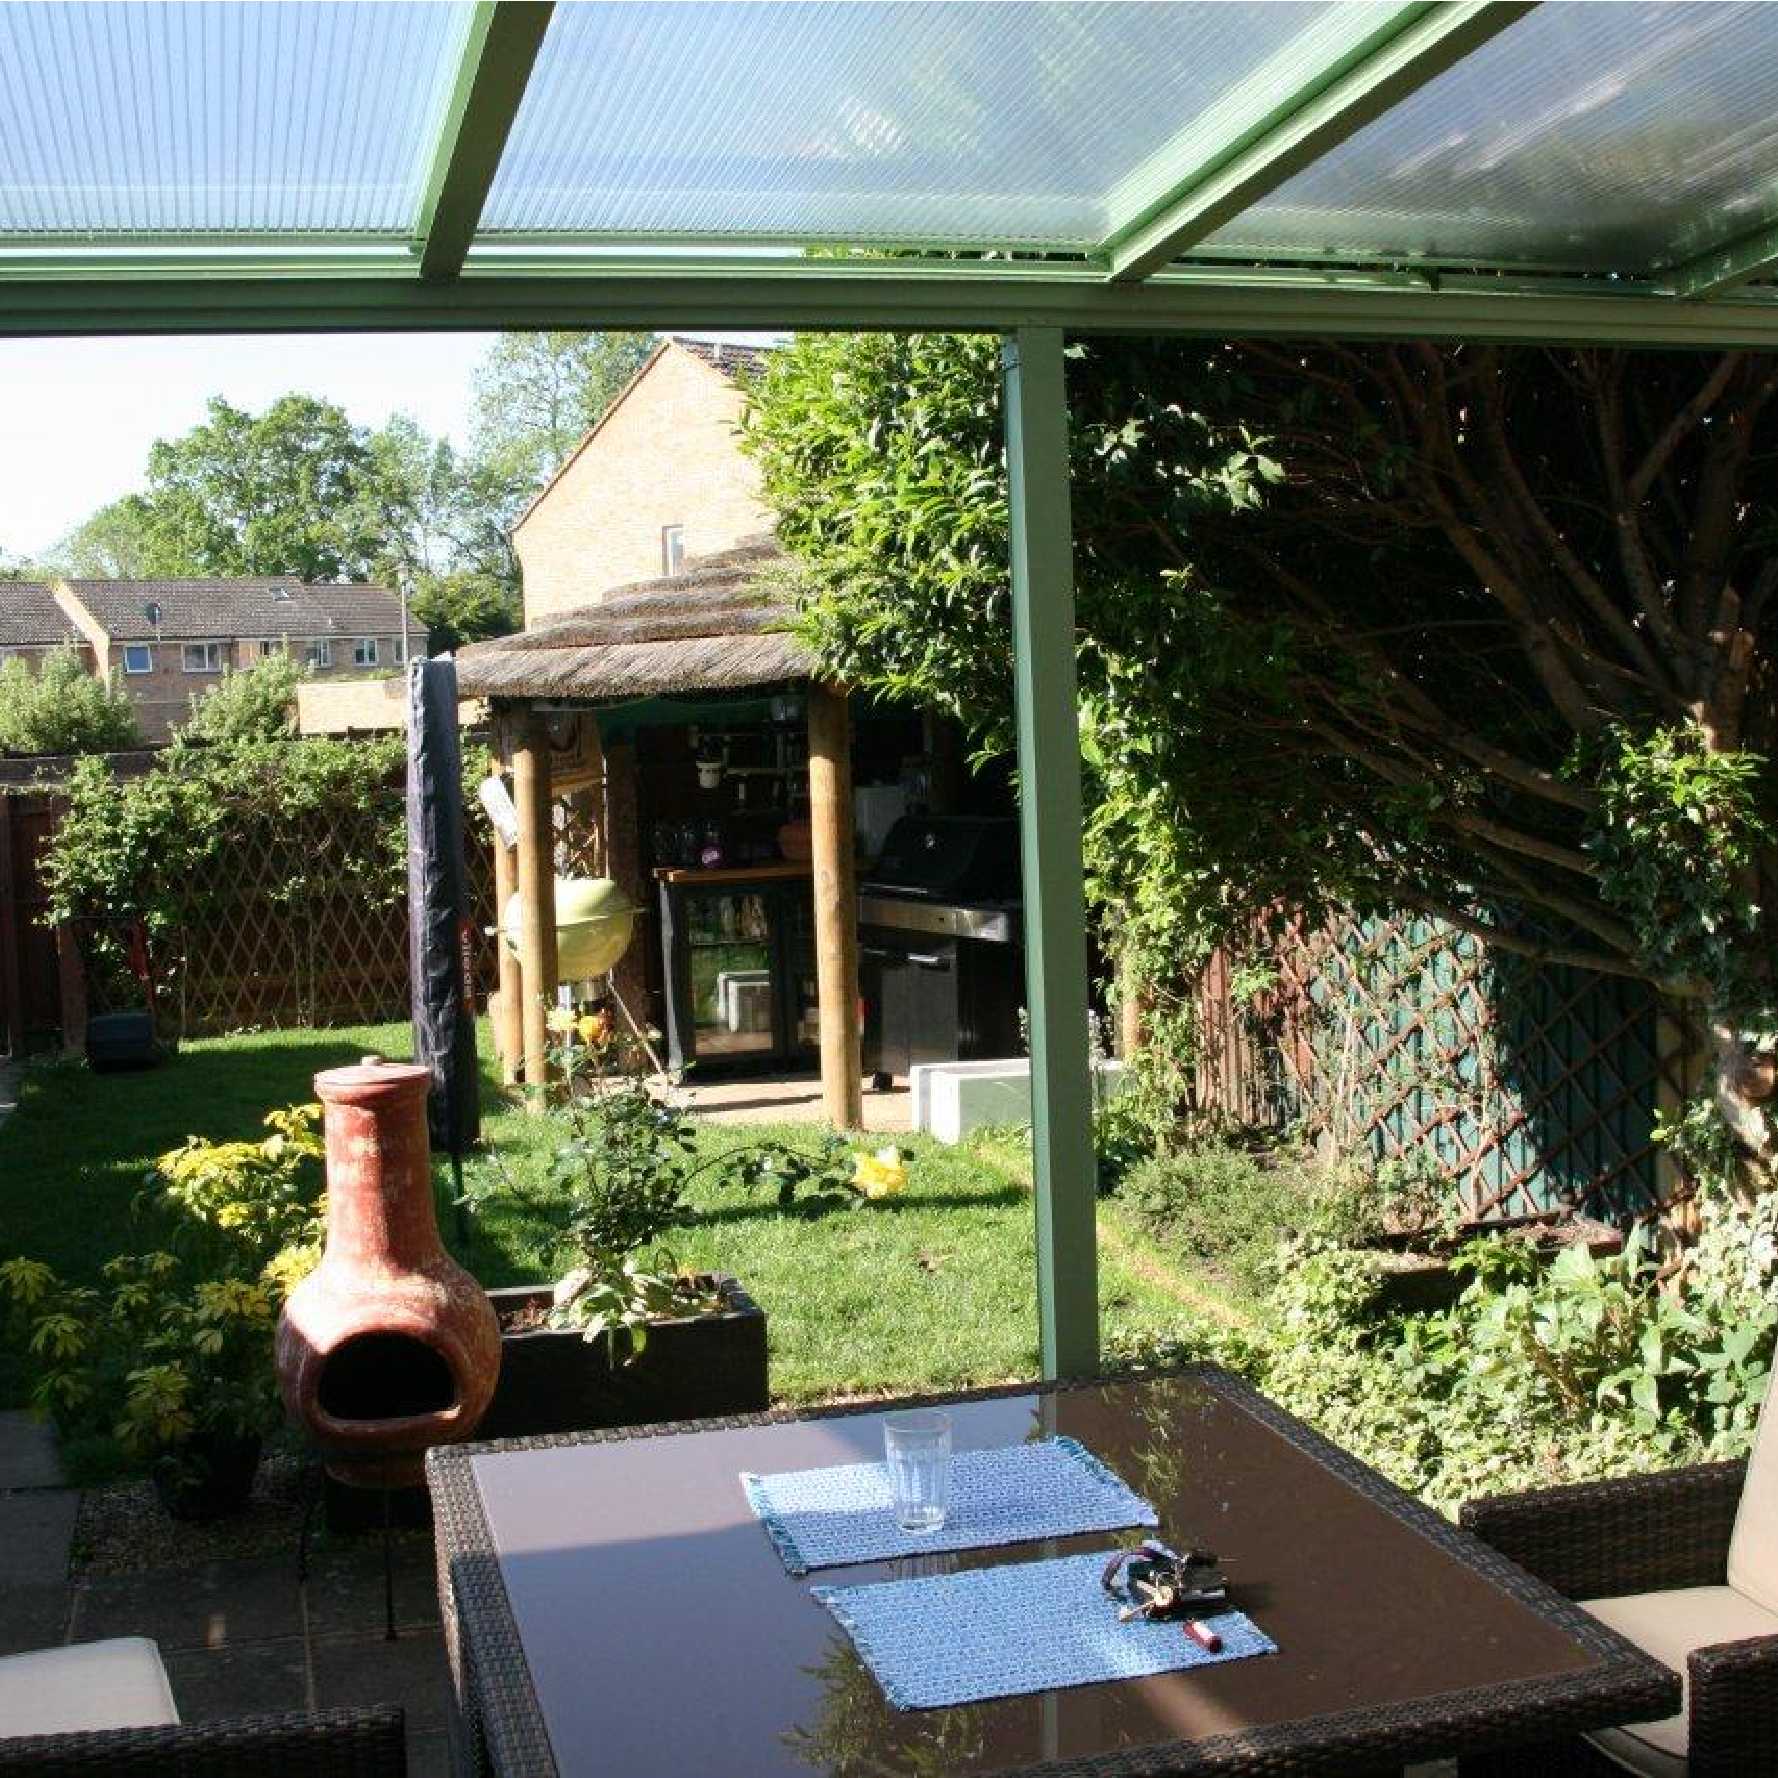 Affordable Omega Smart Lean-To Canopy, White with 16mm Polycarbonate Glazing - 8.4m (W) x 4.0m (P), (4) Supporting Posts